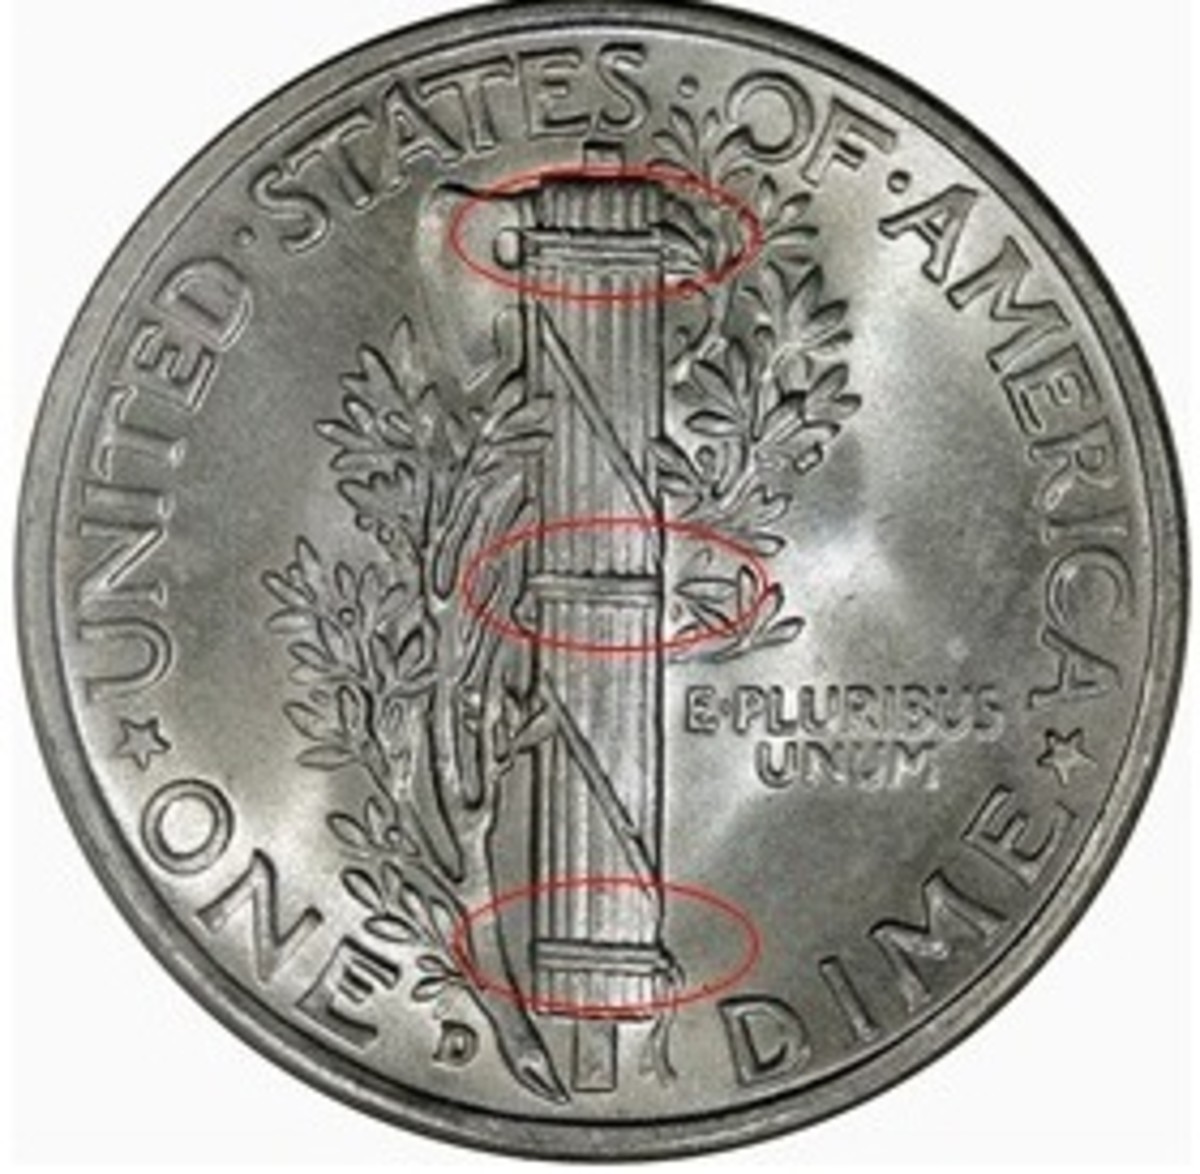 A Mercury dime with full split bands (FSB) shown within the red circles.